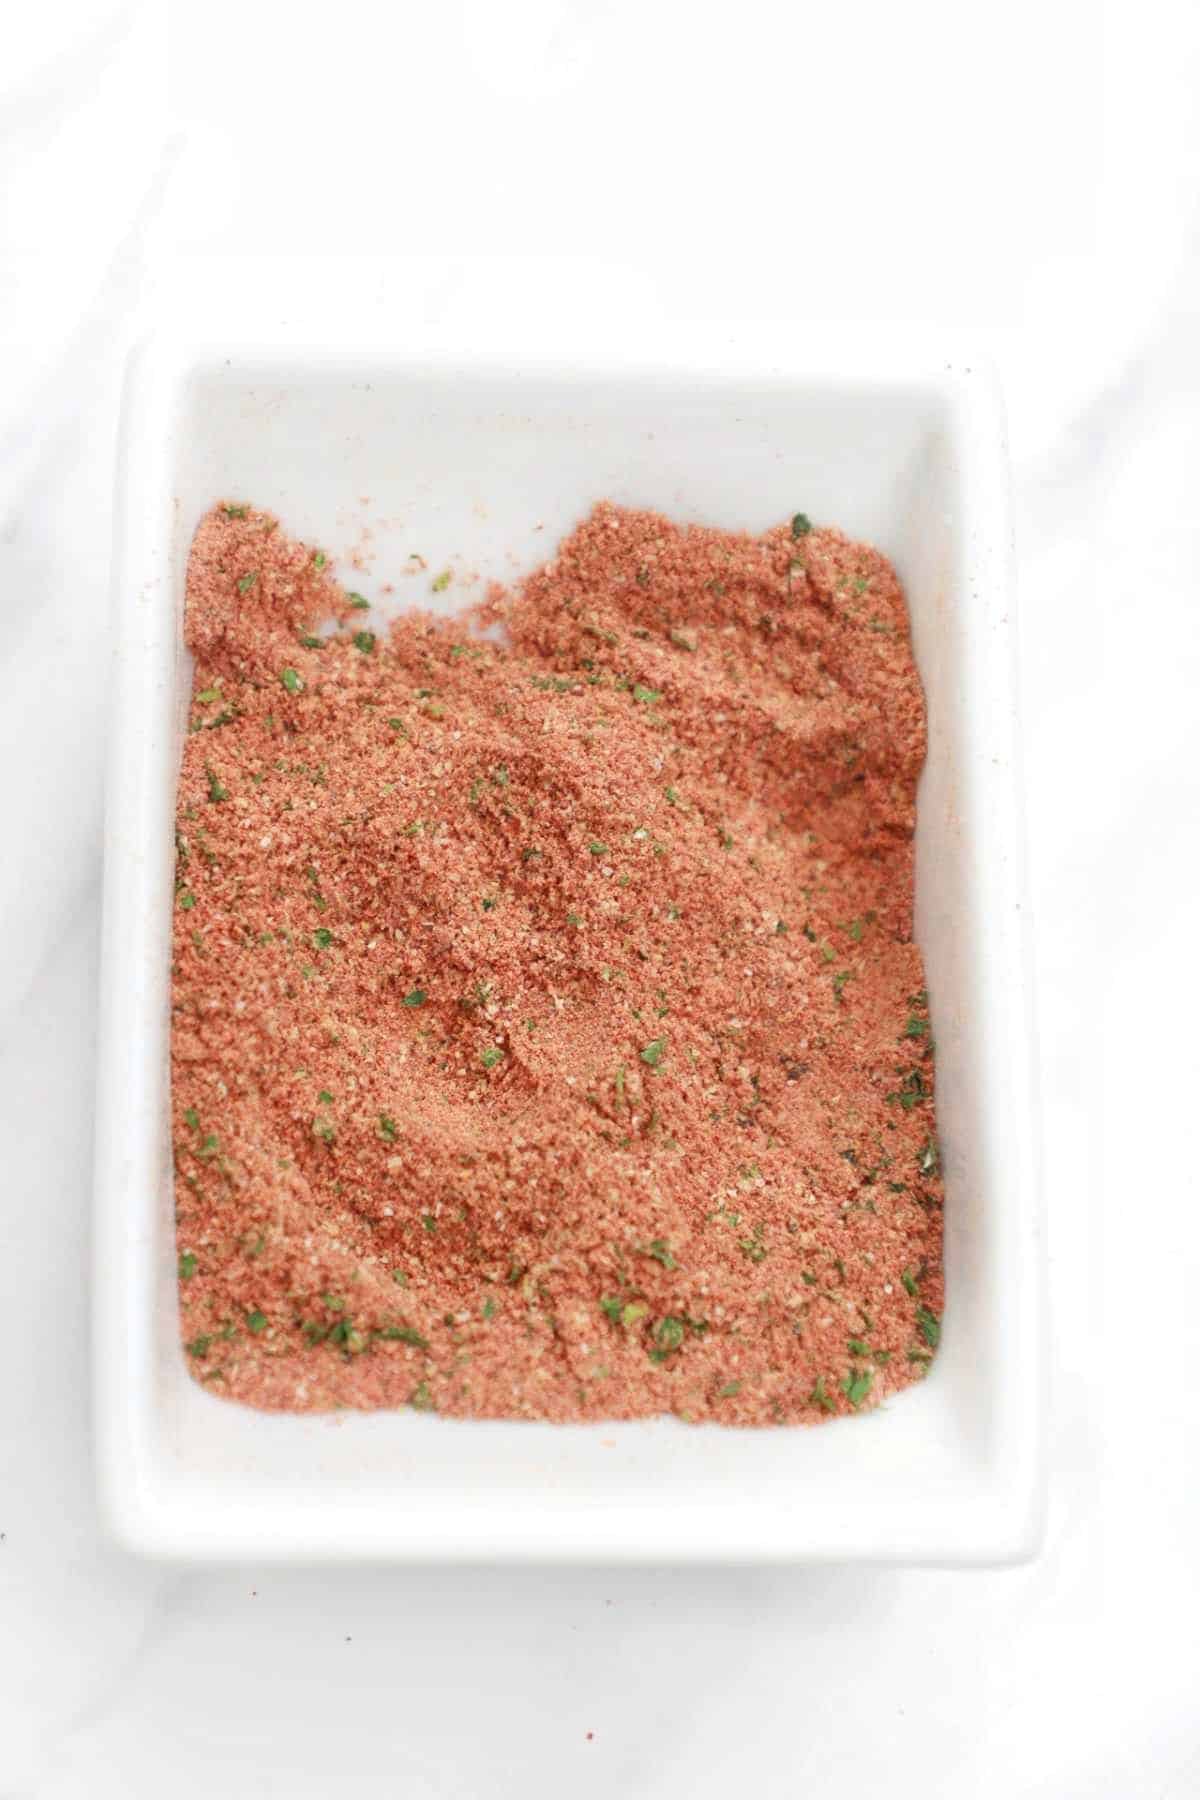 prawn seasoning displayed in a small container.